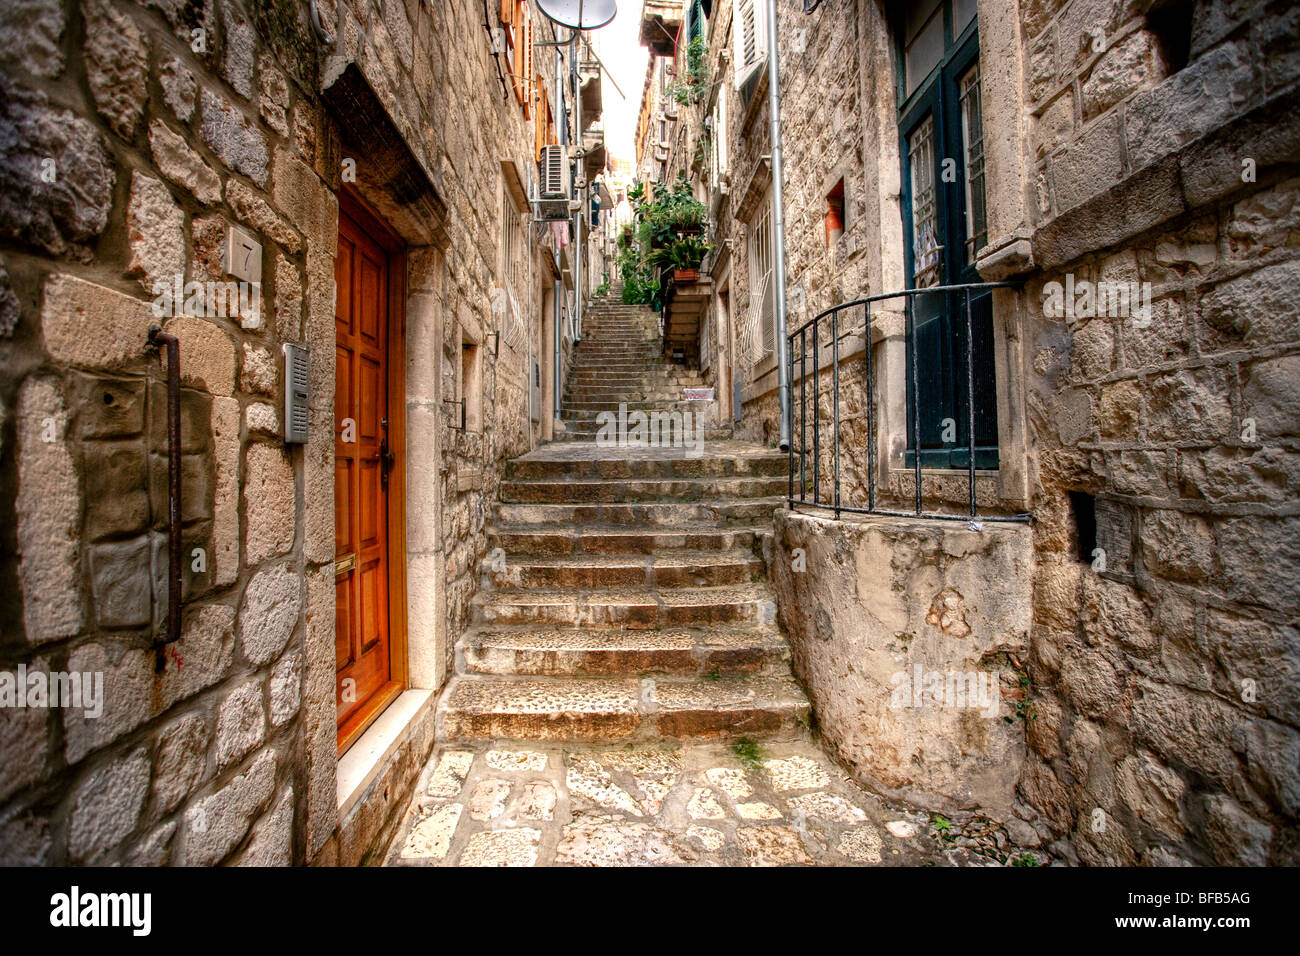 Back streets of old town Dubrovnik, Croatia Stock Photo